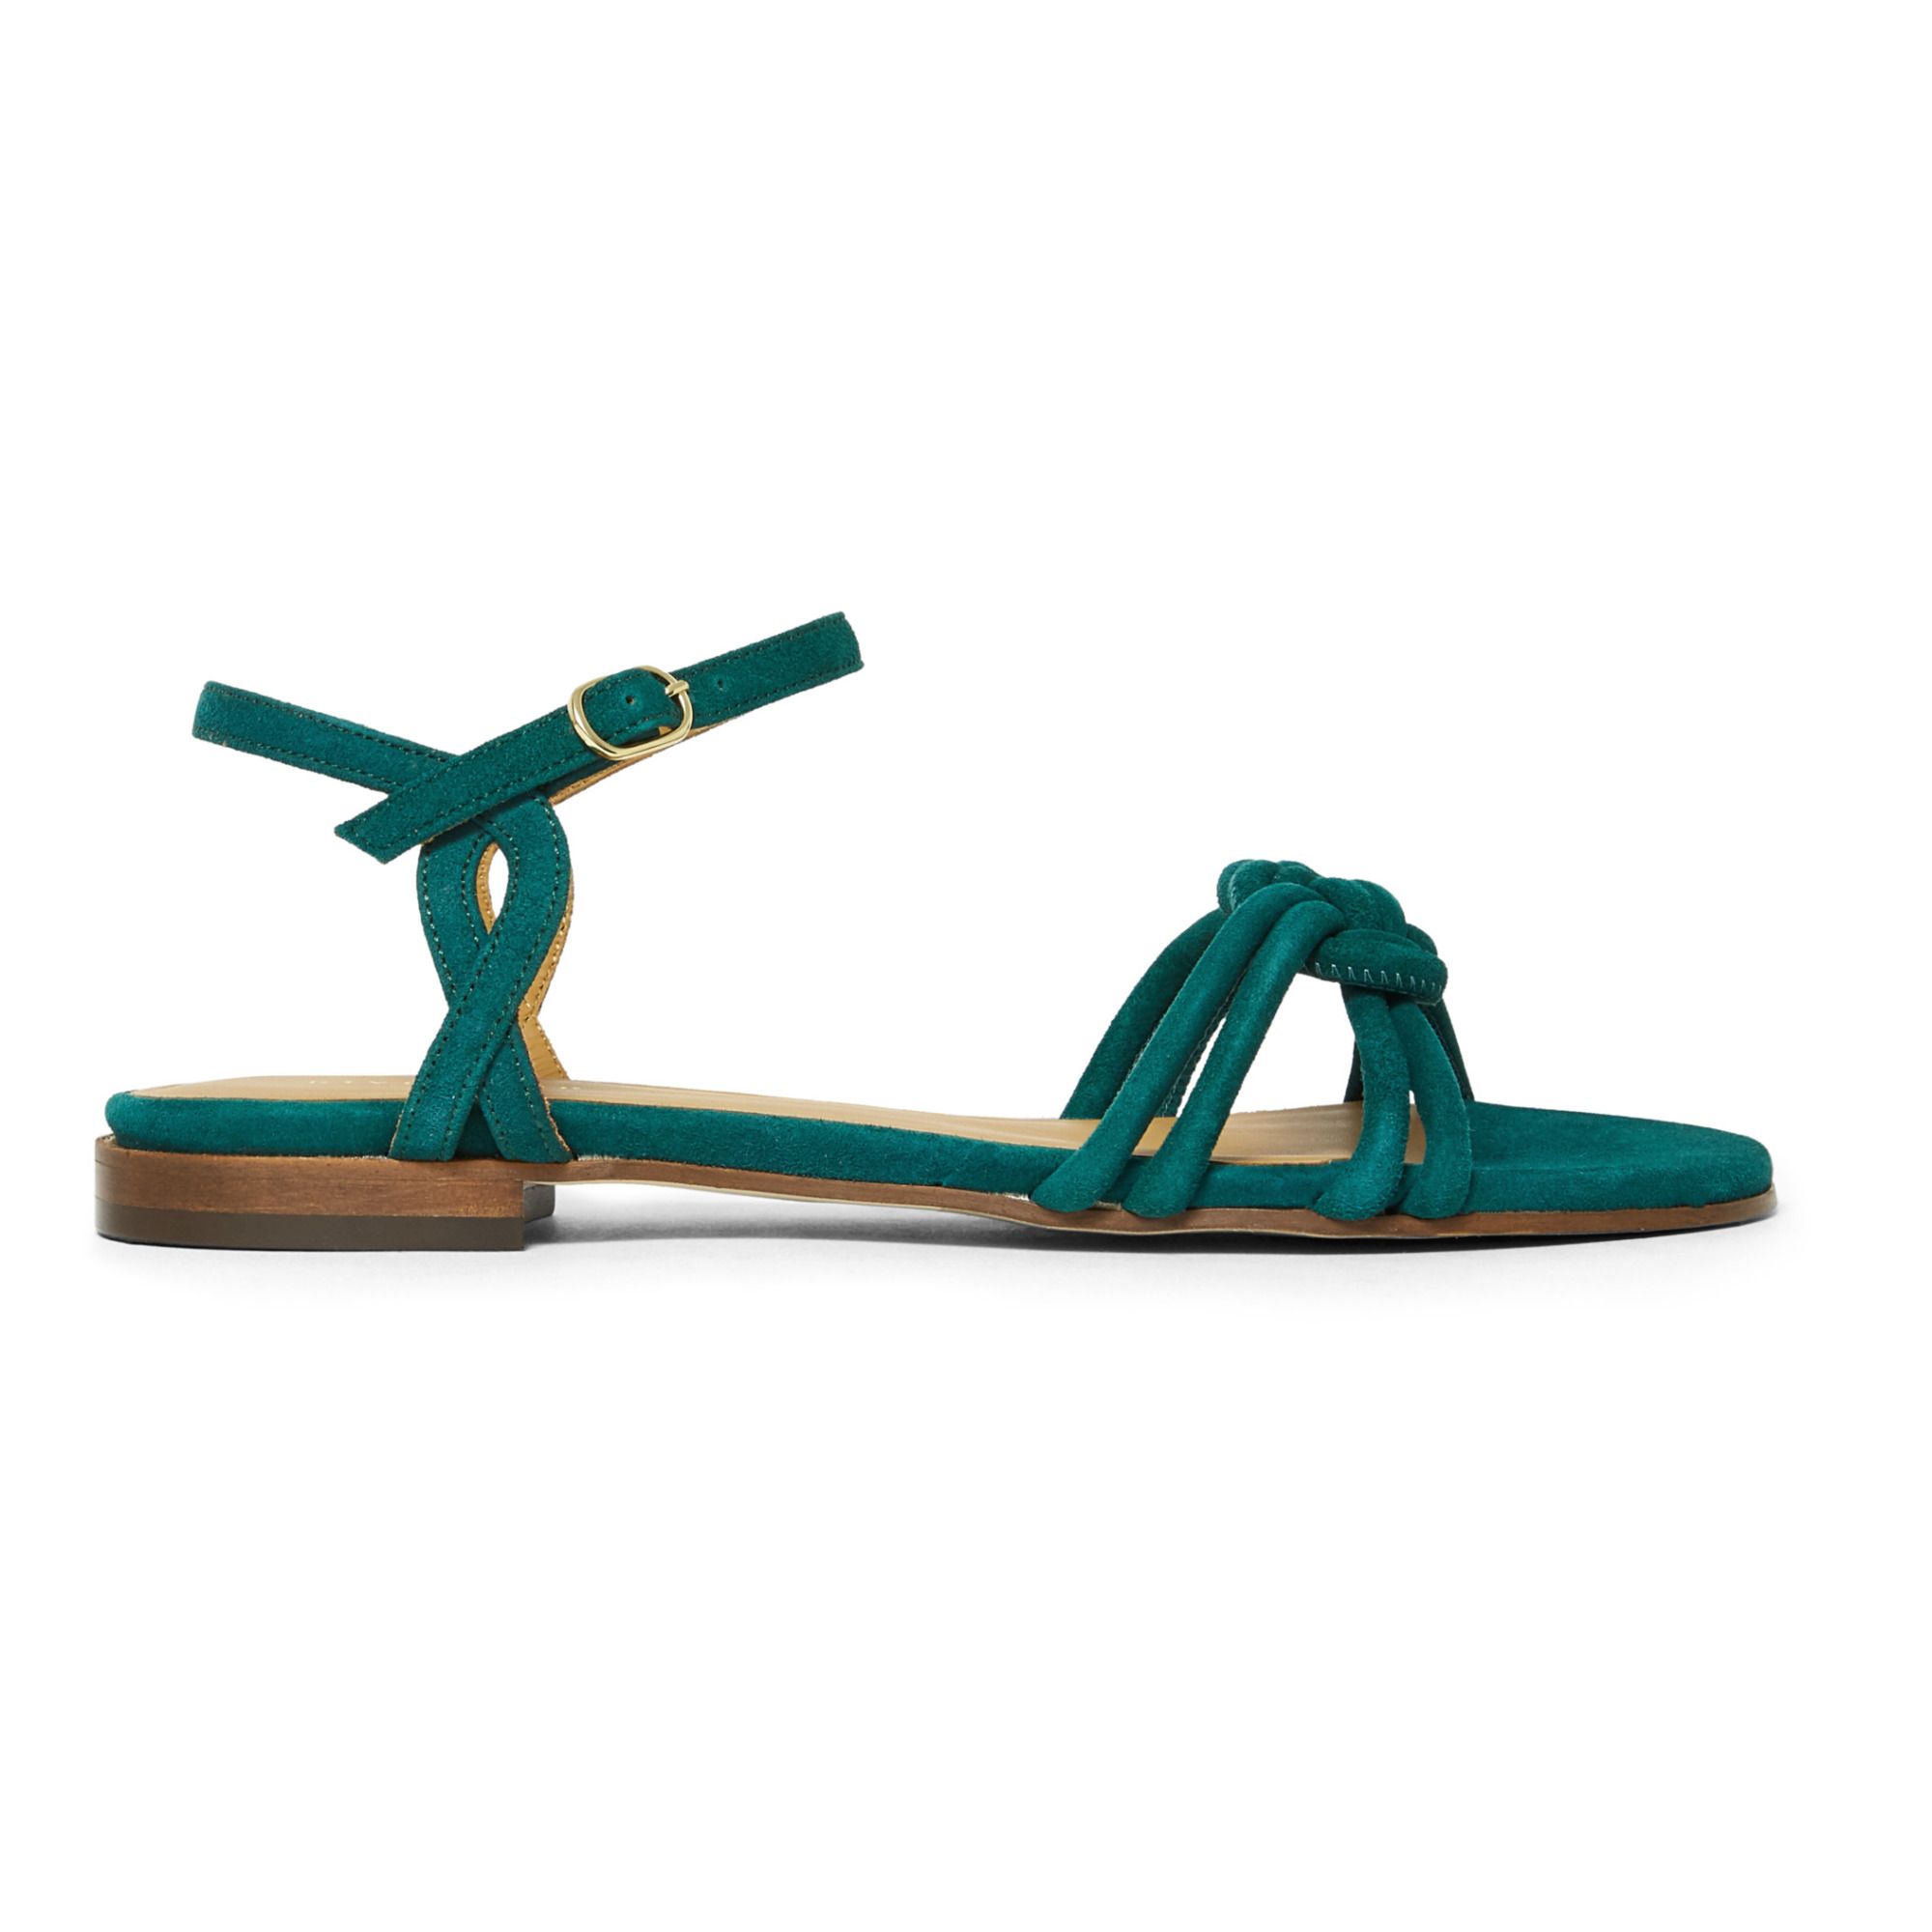 N°112 Sandals Emerald green Rivecour Shoes Adult